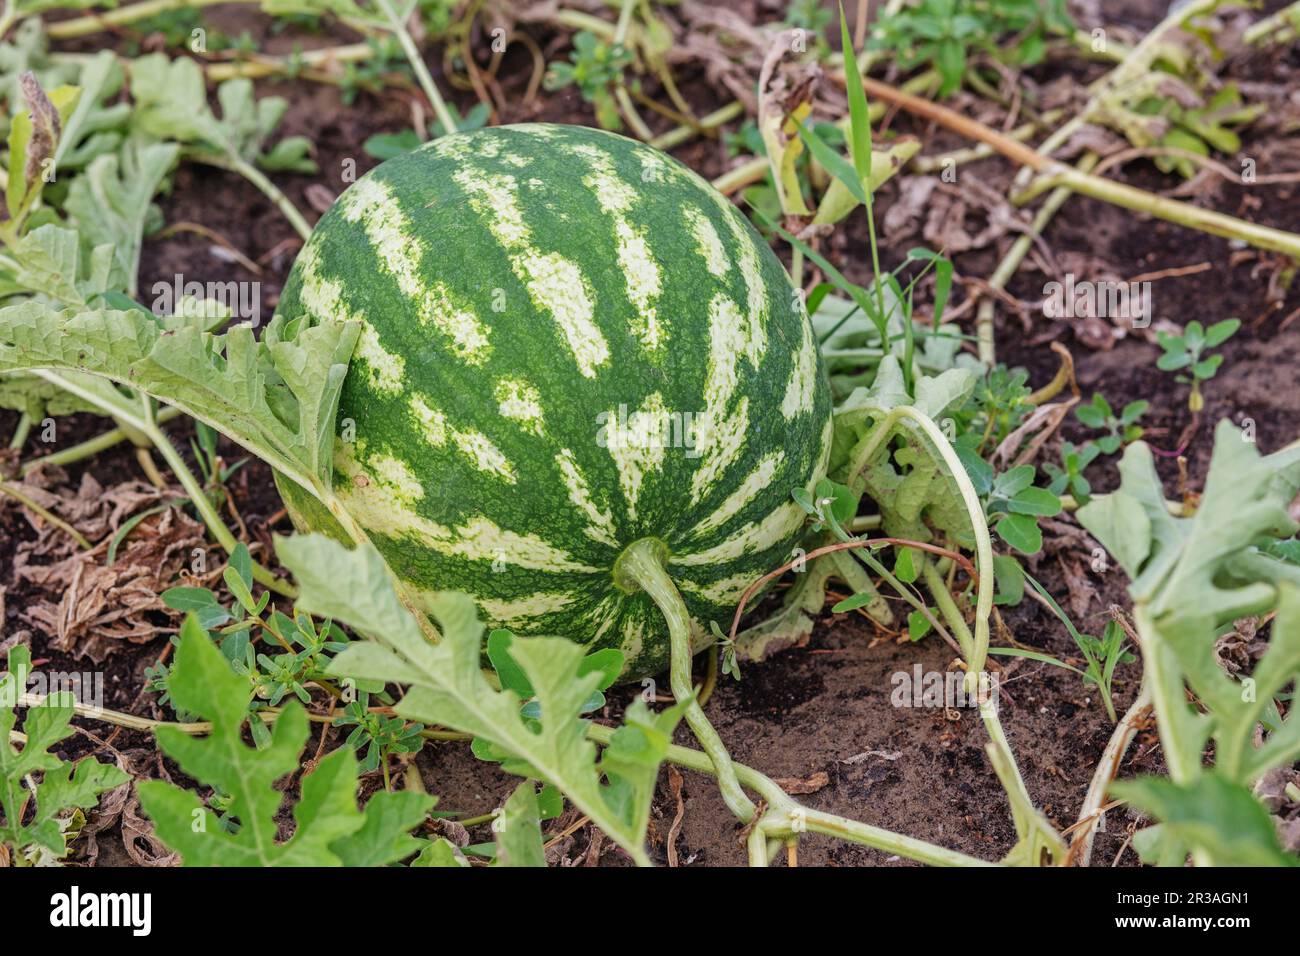 Growing watermelon on the field. Watermelon (Citrullus lanatus) in a vegetable garden Stock Photo